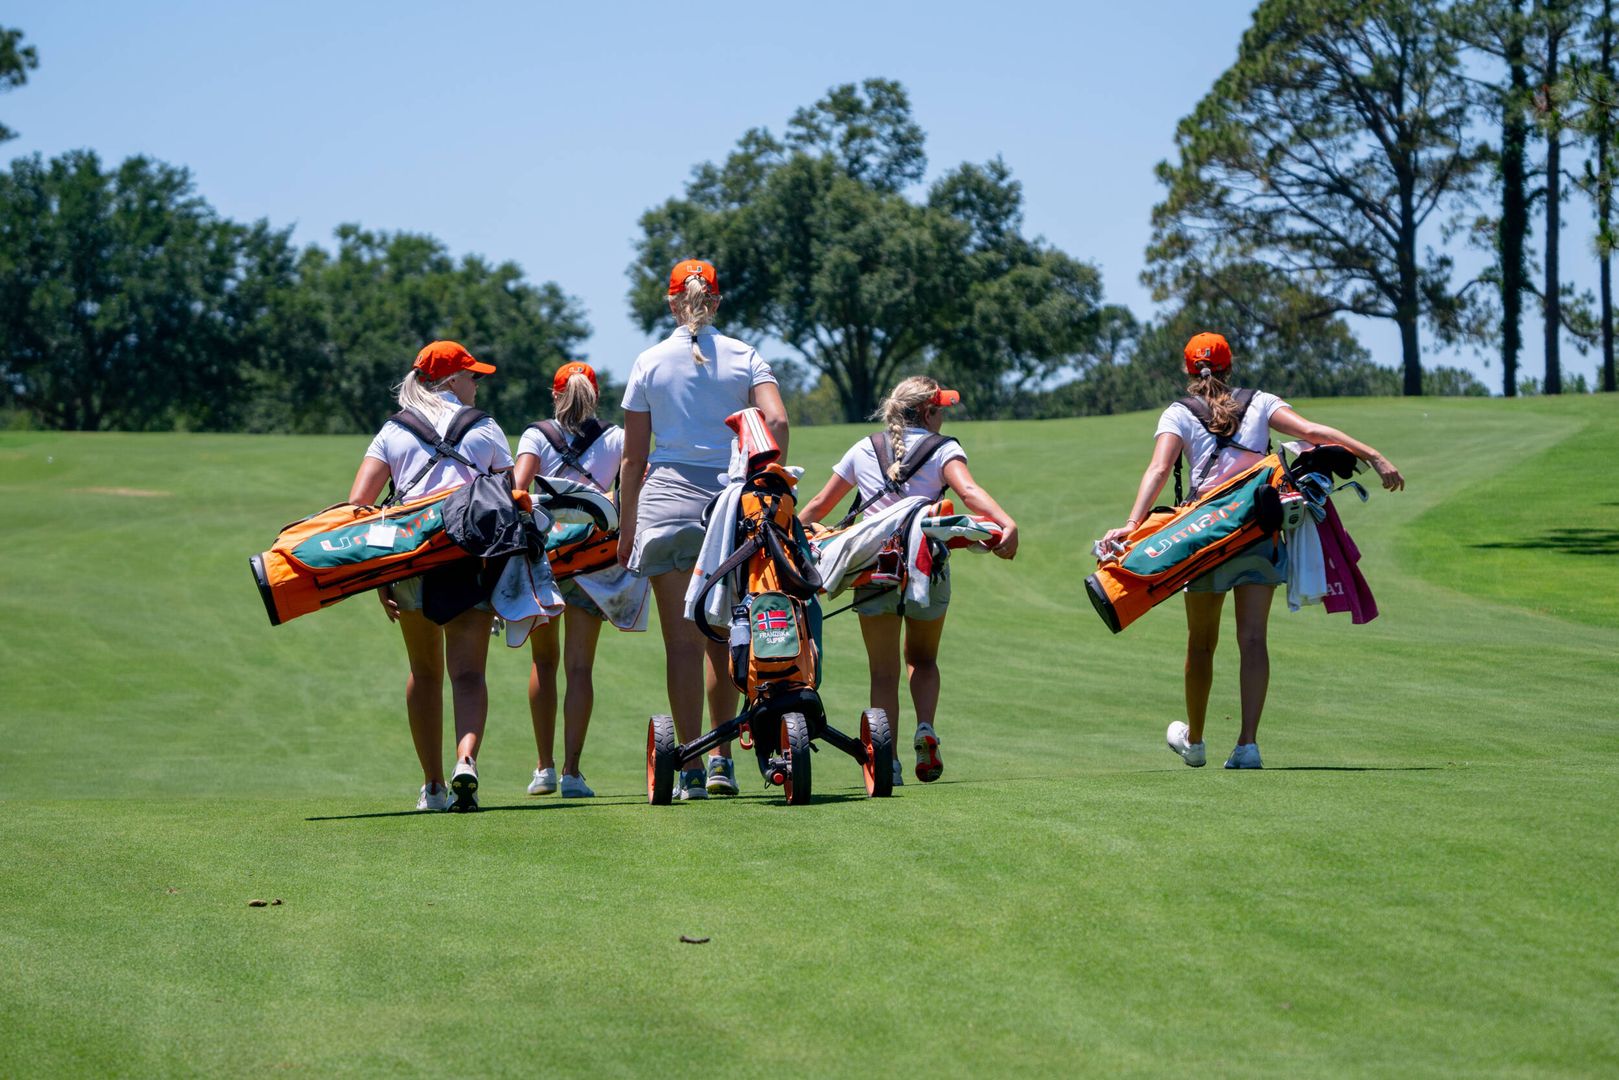 Hurricanes Place Fifth at NCAA Regional